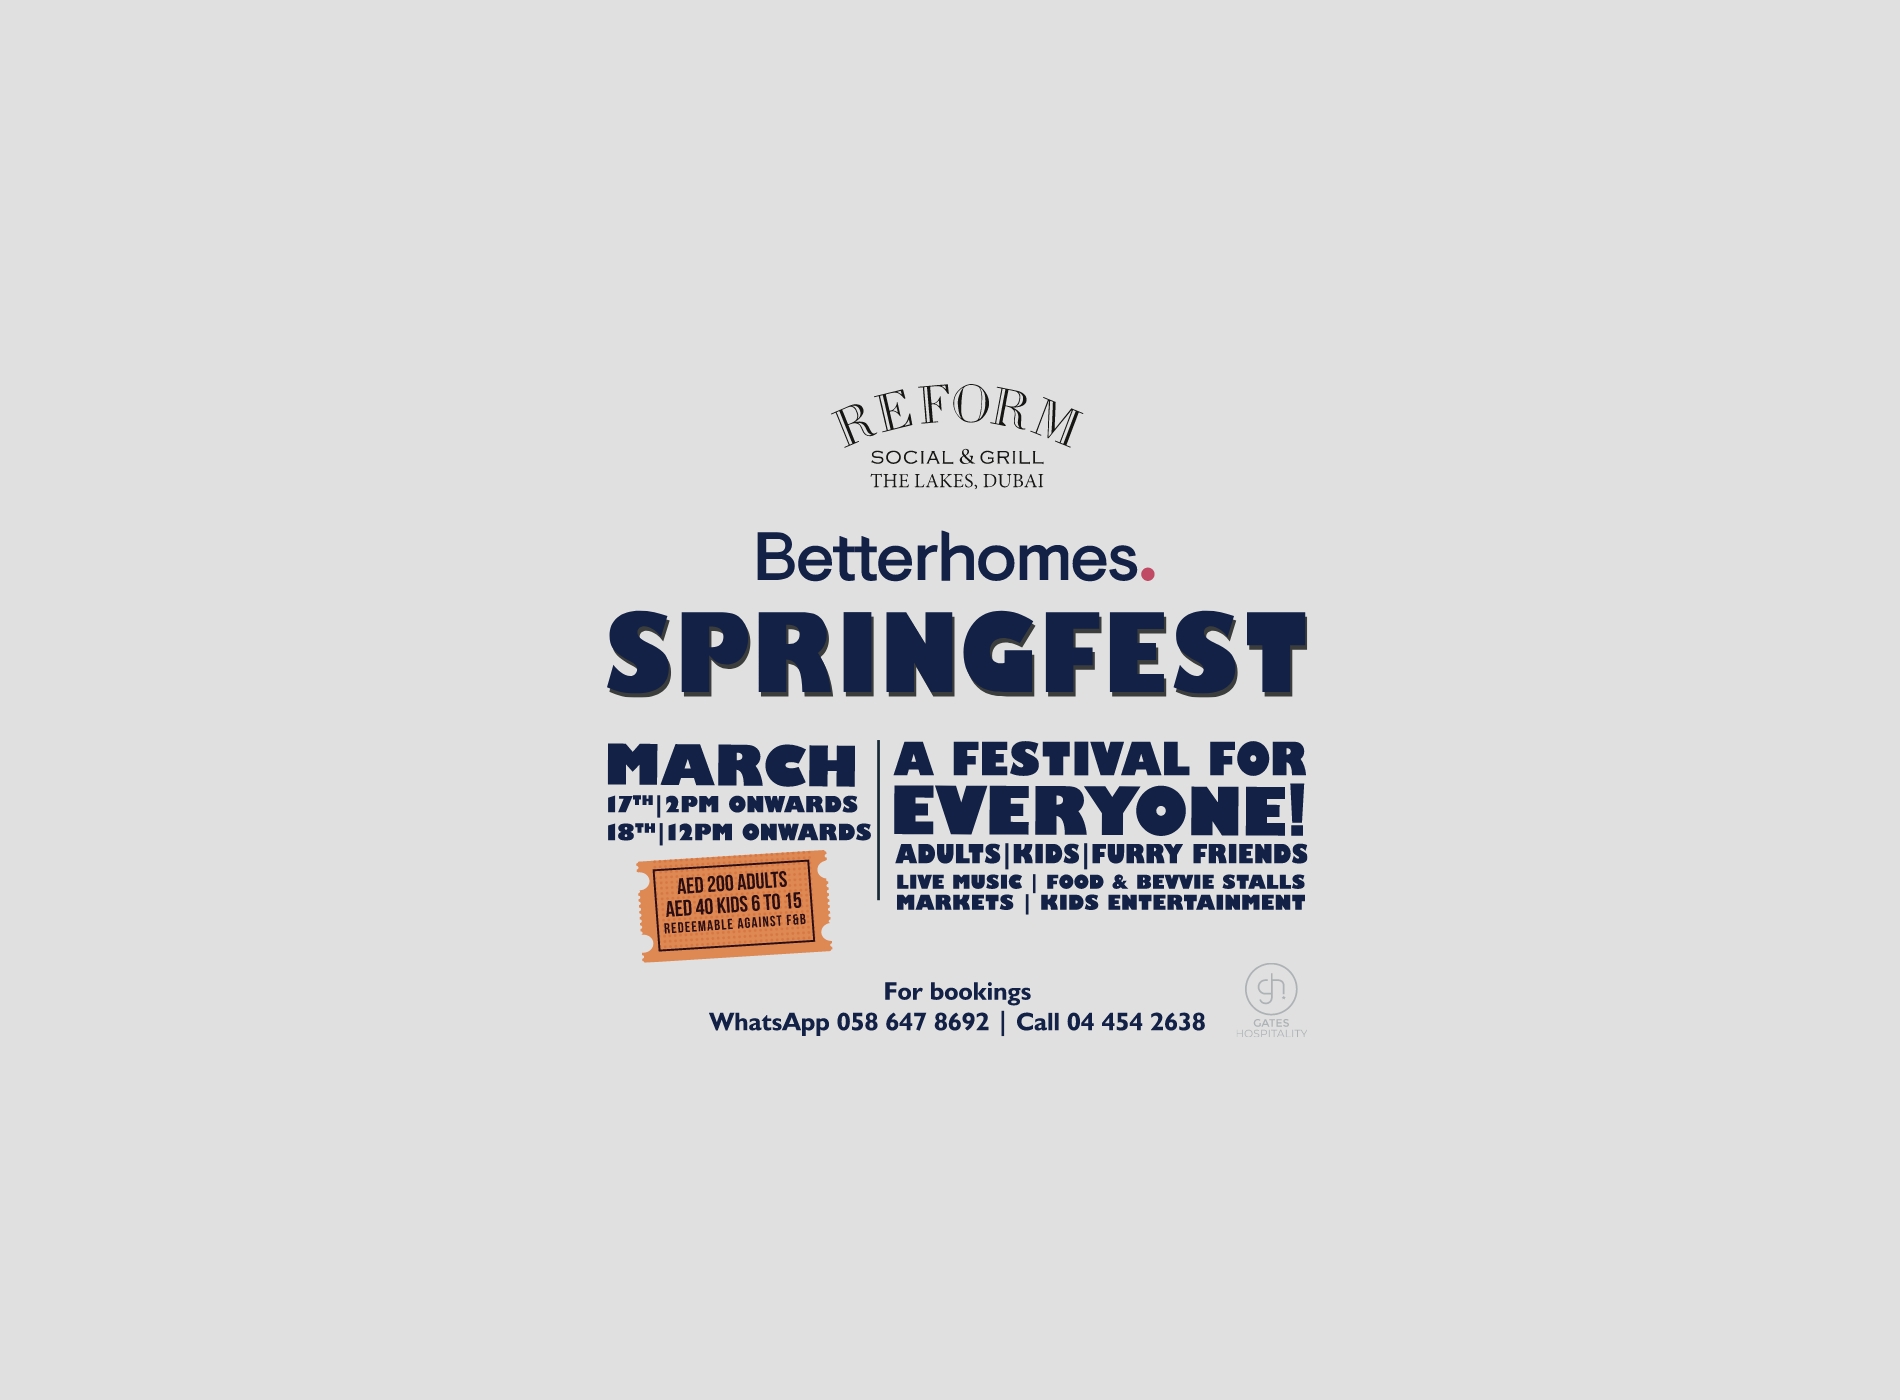 Join Us At Betterhomes Springfest!